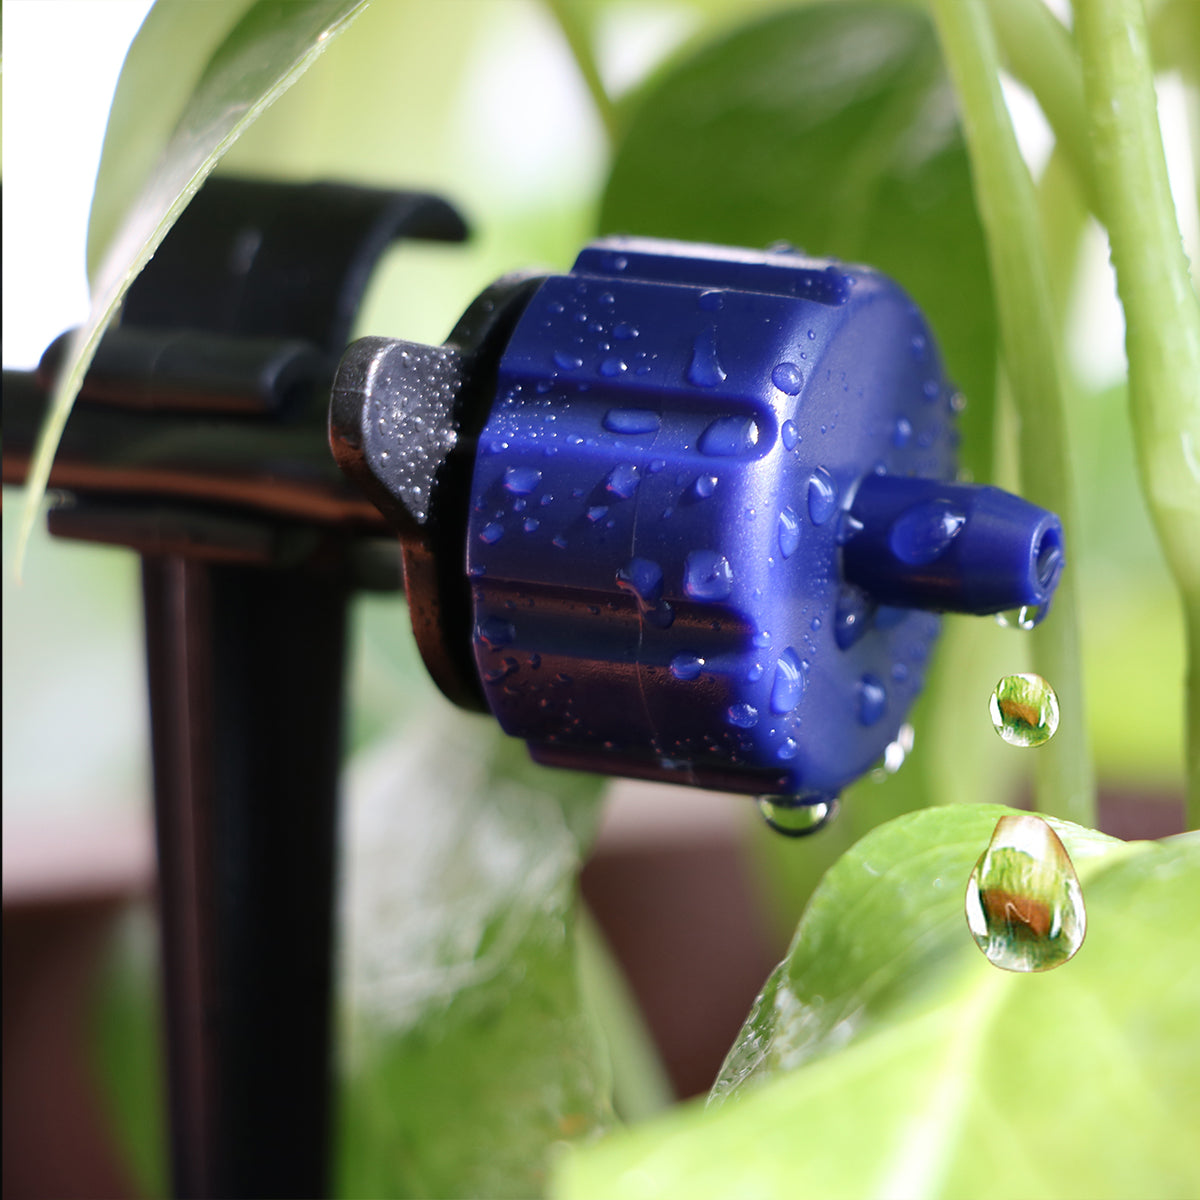 Yardeen 10m Automatic Micro Drip Irrigation System Garden Drippers Watering Kits and Pressure Reducing Valve